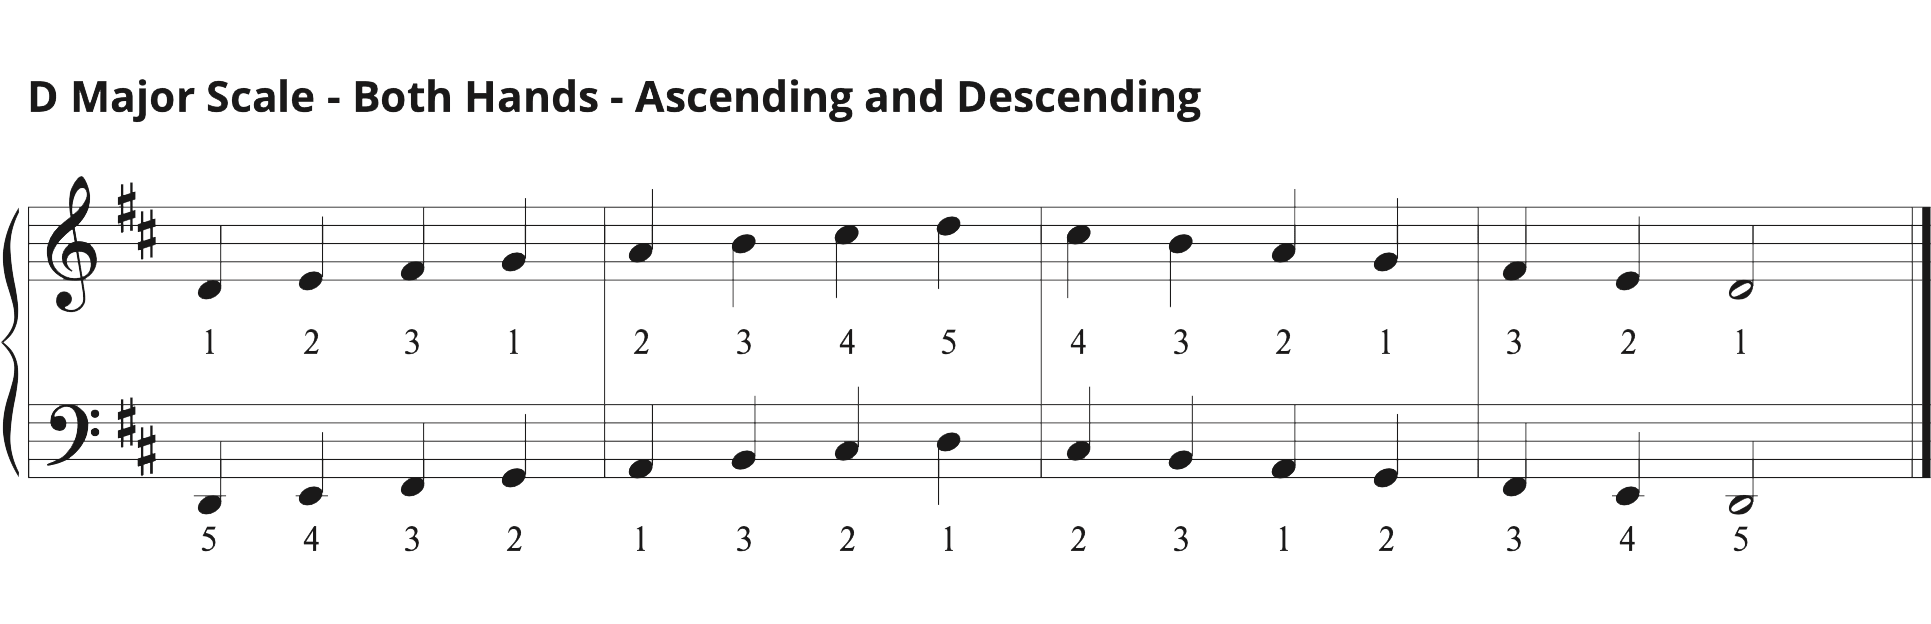 D Major scale both hands, ascending and descending on grand staff, one octave with fingering in quarter notes.